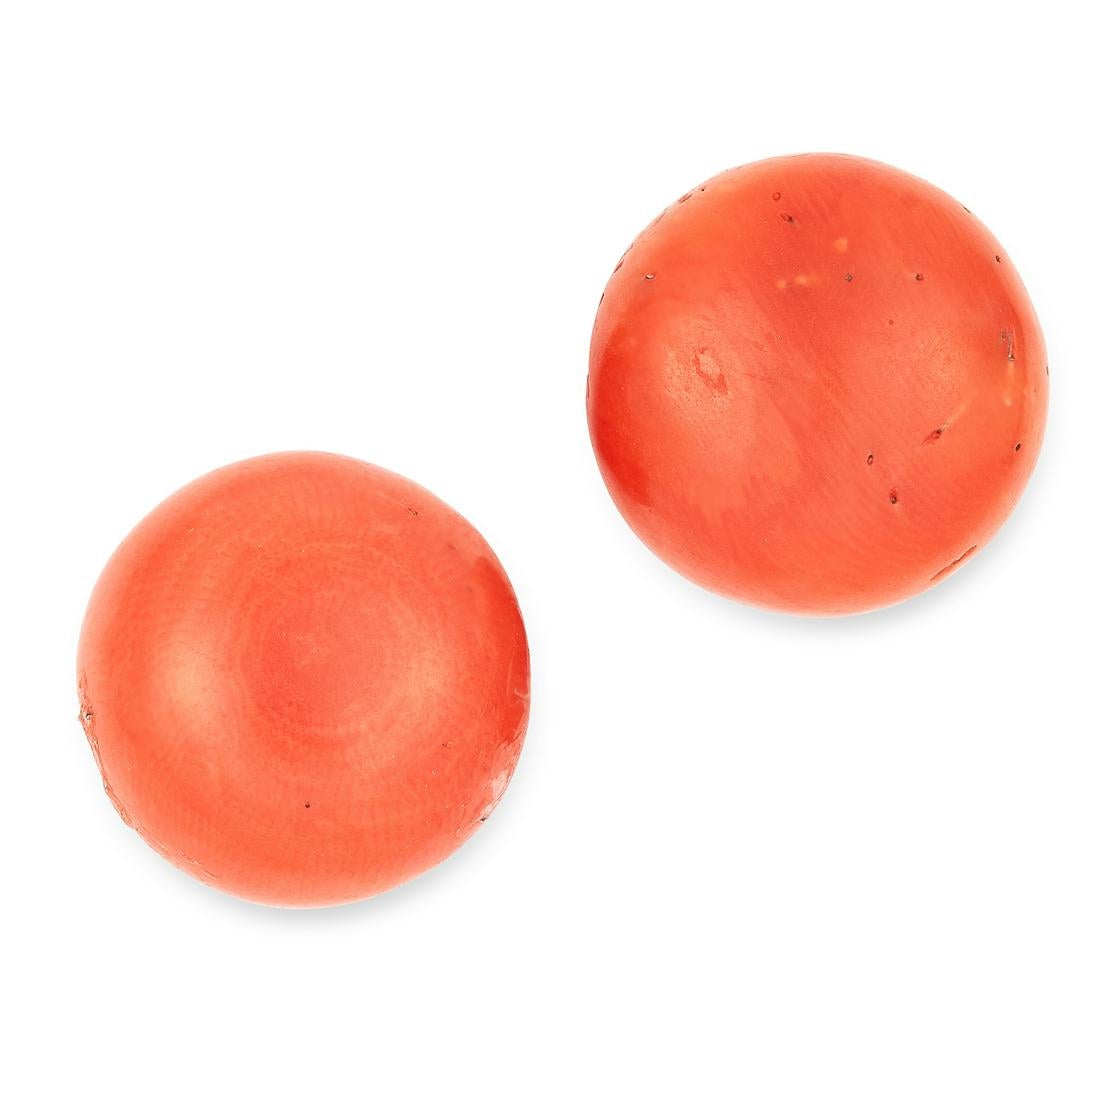 A PAIR OF ANTIQUE CORAL STUD EARRINGS in yellow gold, each set with a polished coral bead of 7.7-7.